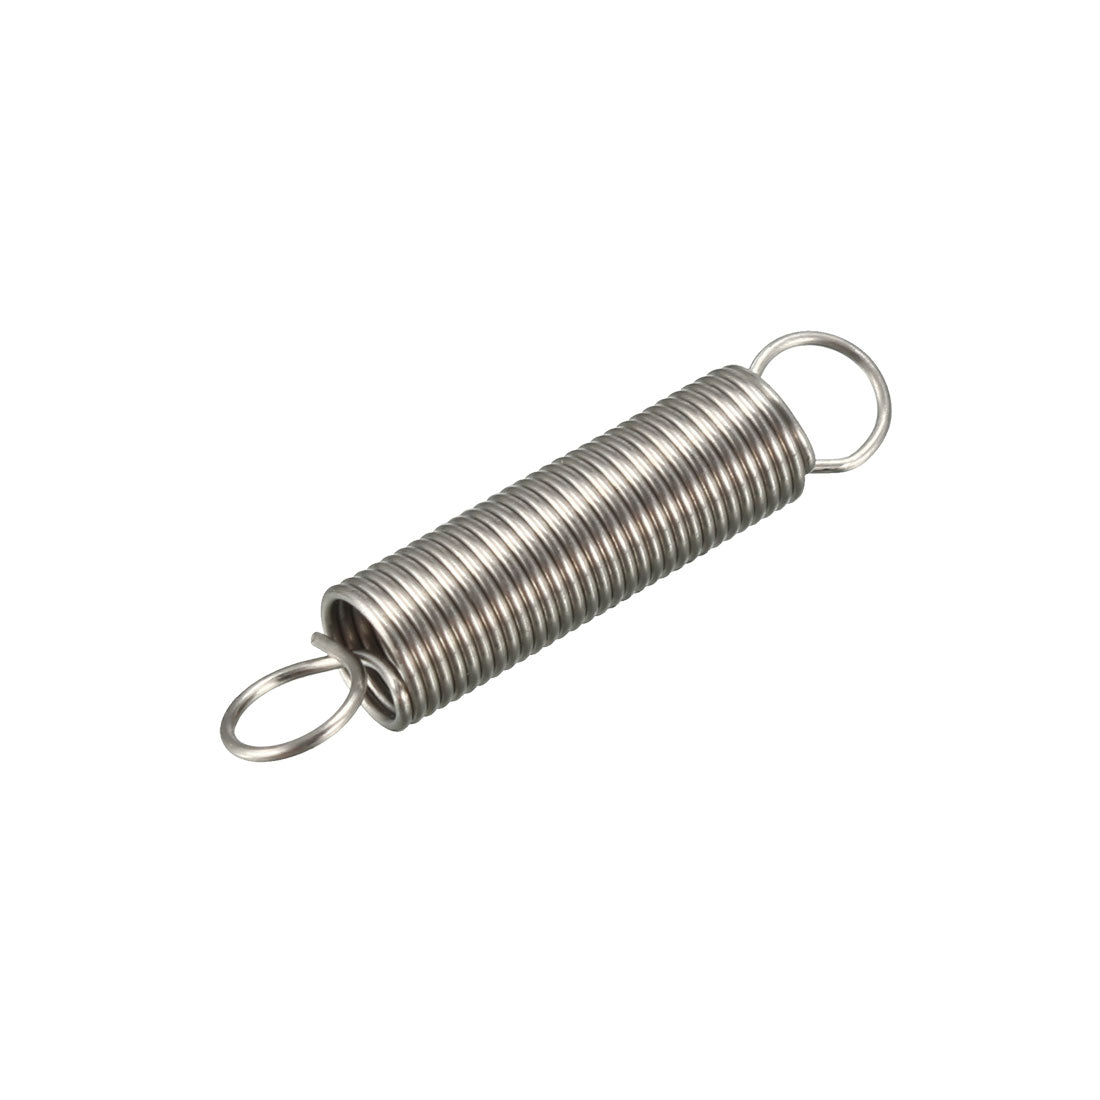 uxcell Uxcell Extended Tension Spring Wire Diameter 0.016", OD 0.16", Free Length 0.79" 5pcs